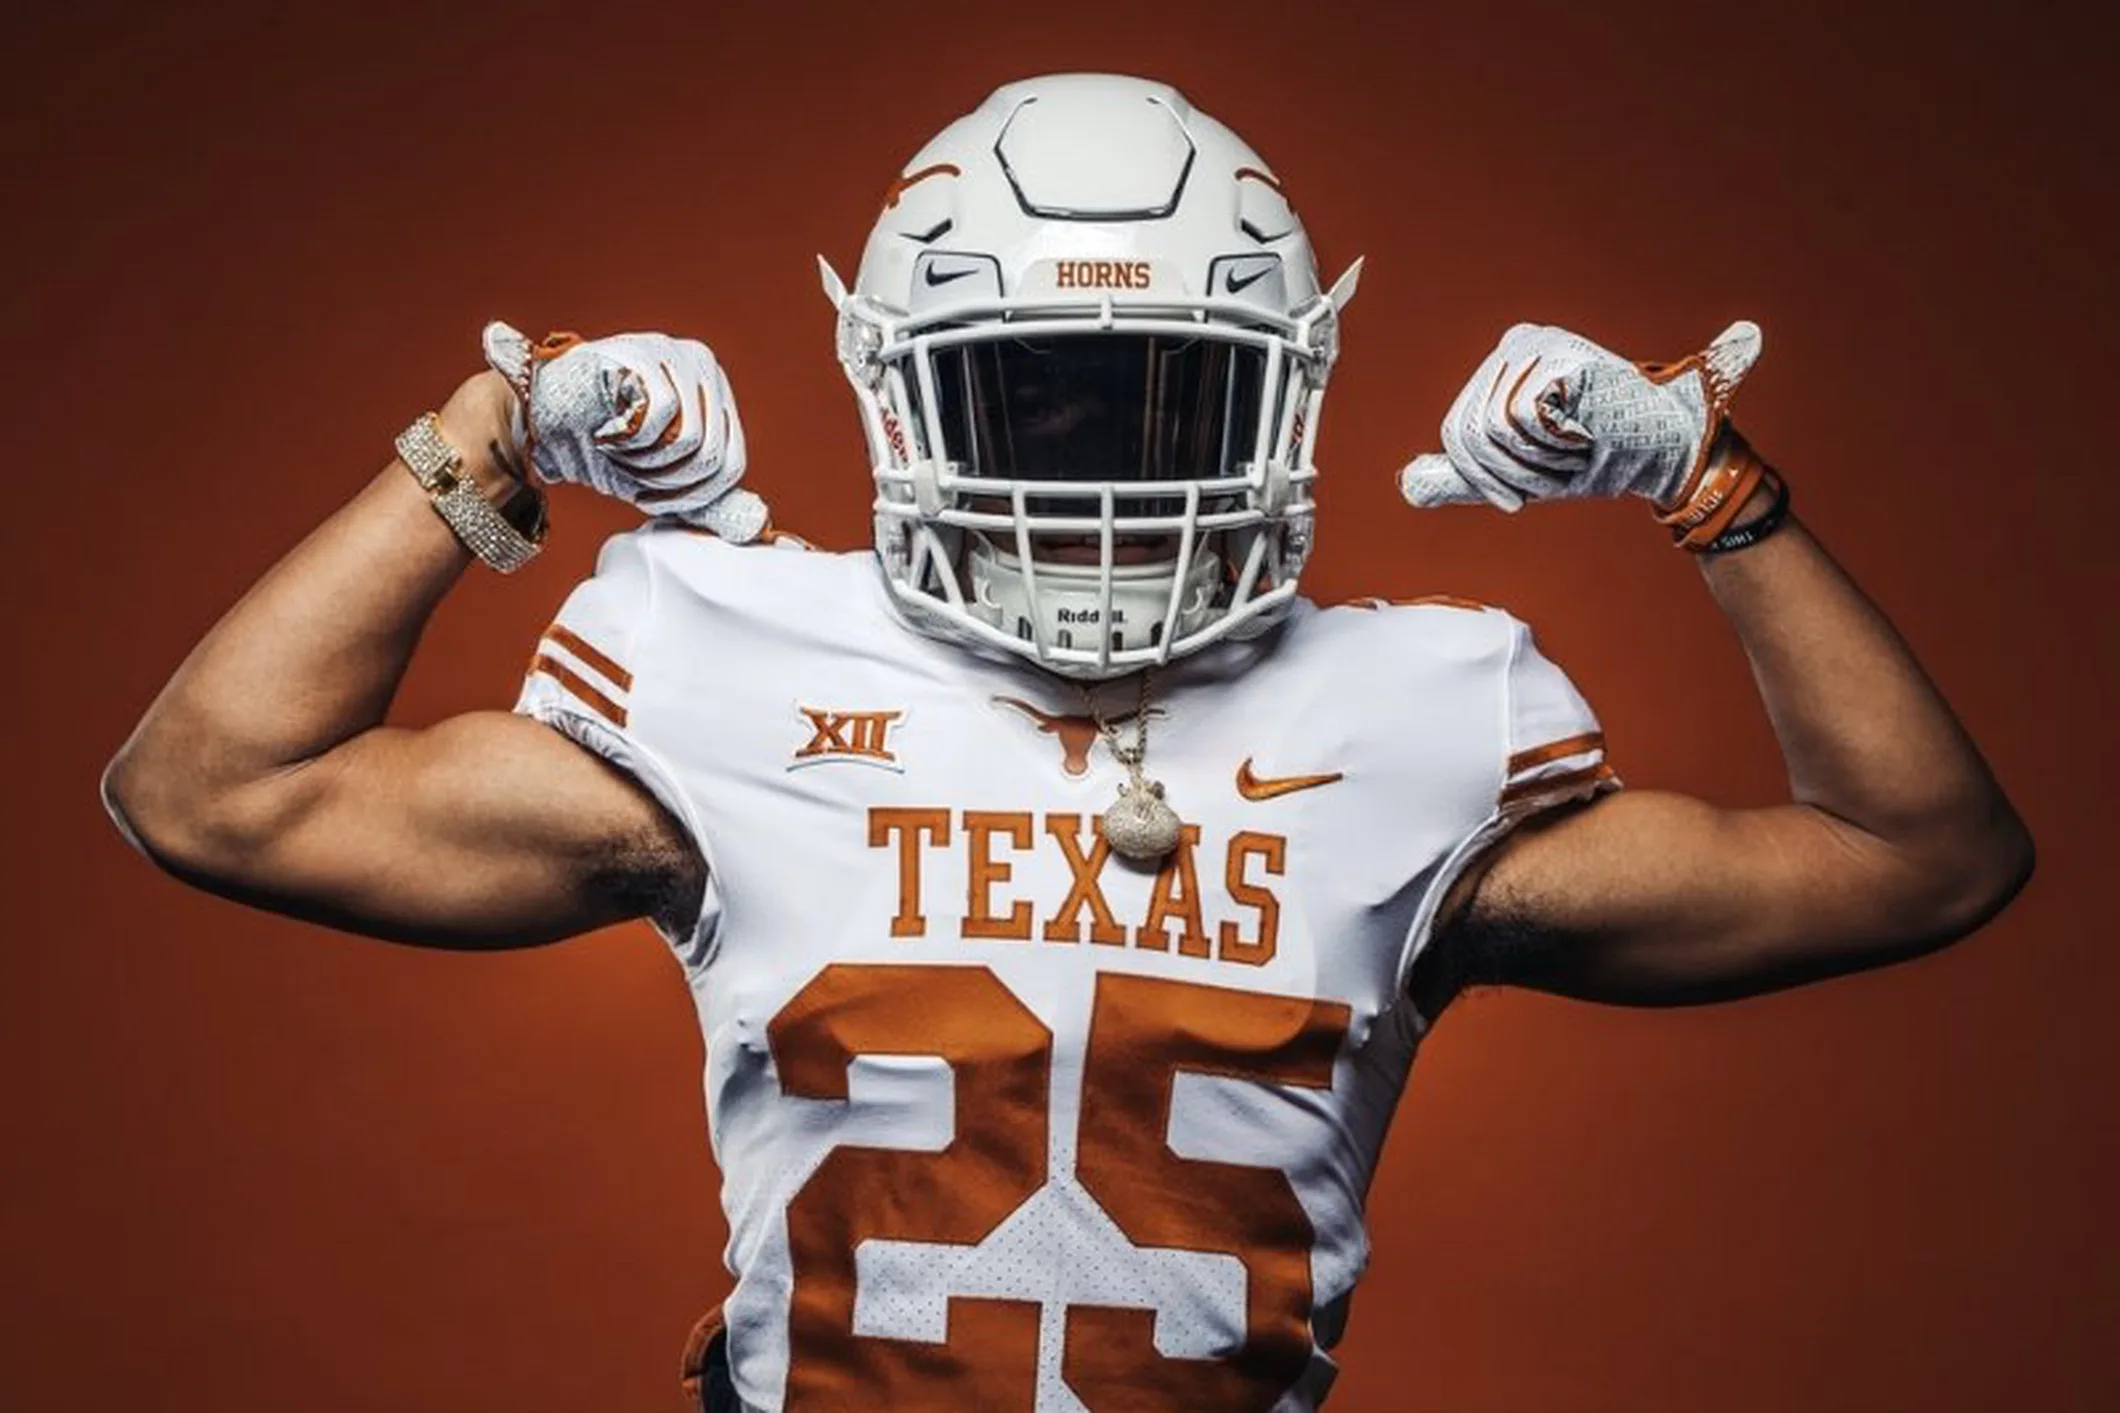 Texas running back Jonathan Brooks (above) leads the No. 3 Longhorns against No. 12 Oklahoma, both teams with 5-0 records, on Saturday morning in a showdown at the Cotton Bowl. Kickoff is at 11 a.m. on ABC. (Photo courtesy of BURNTORANGENATION.COM)